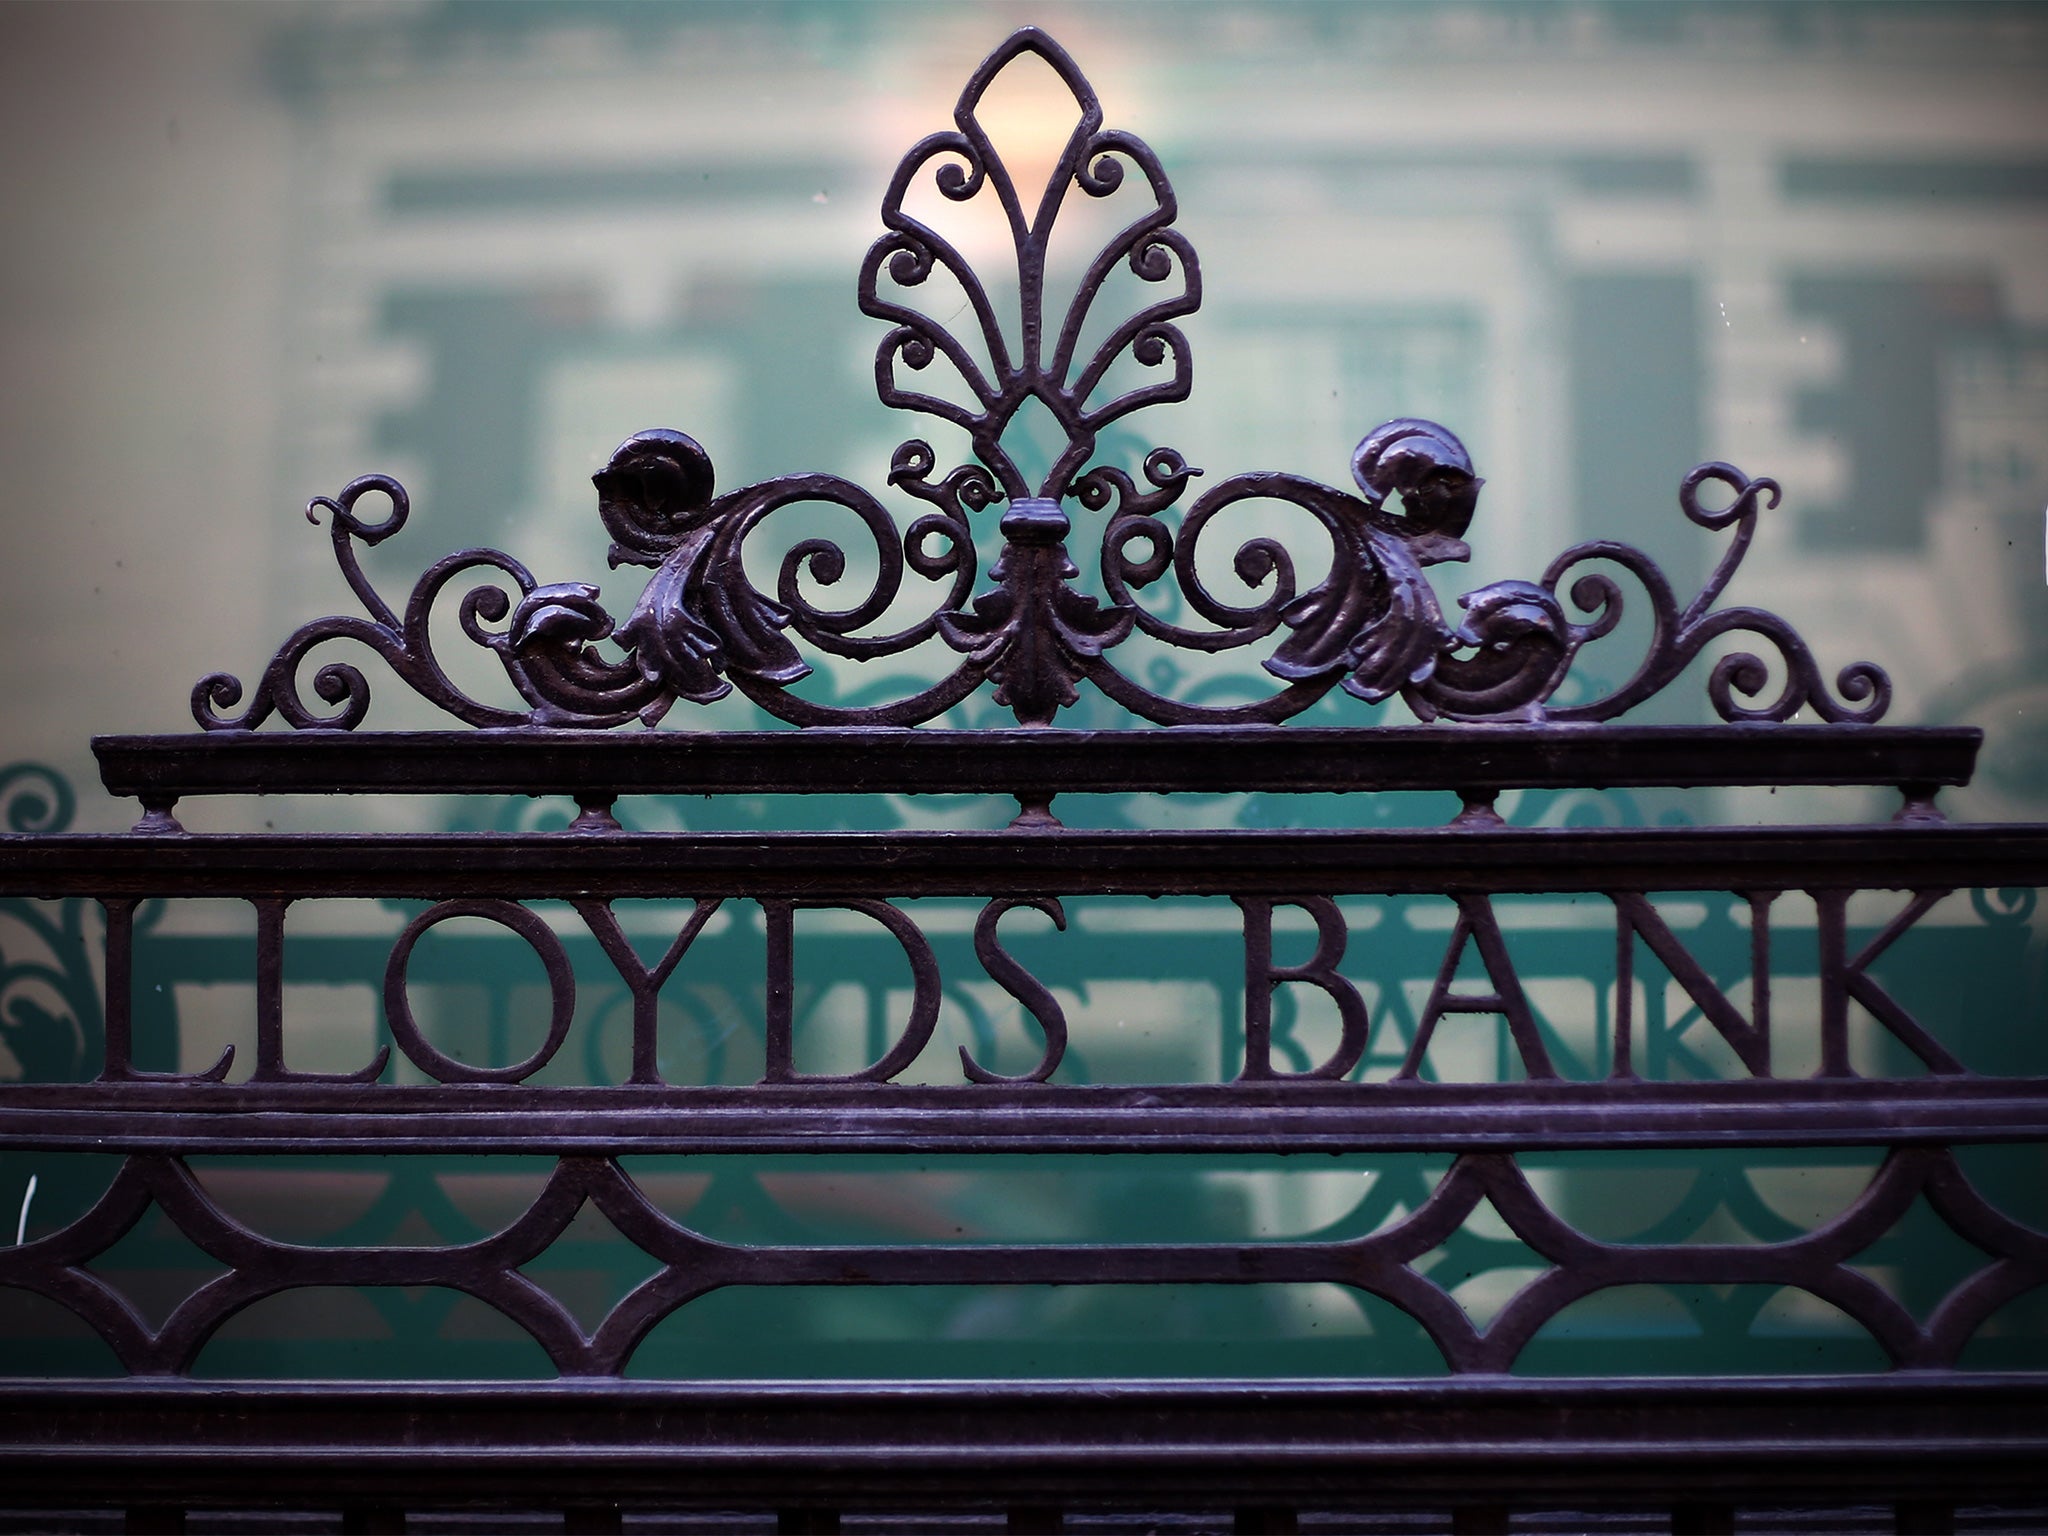 Lloyds surprised the market by saying that it would beat expectations for profit margins